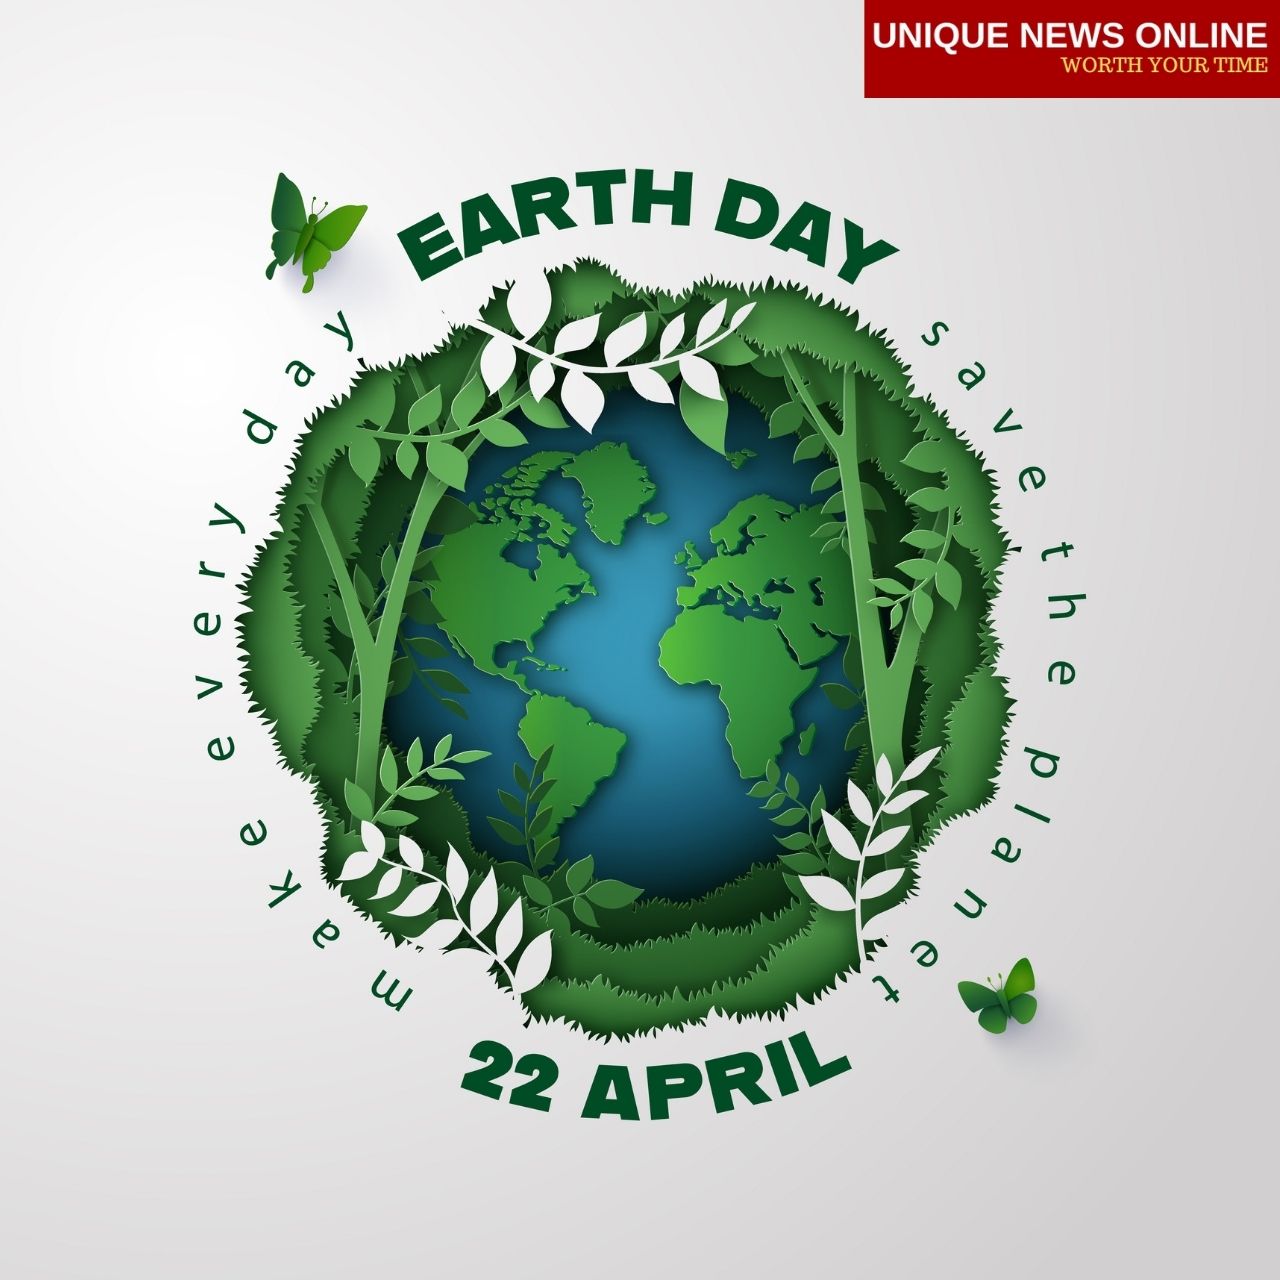 World Earth Day 2021 Theme, Wishes, Quotes, and Images to Share